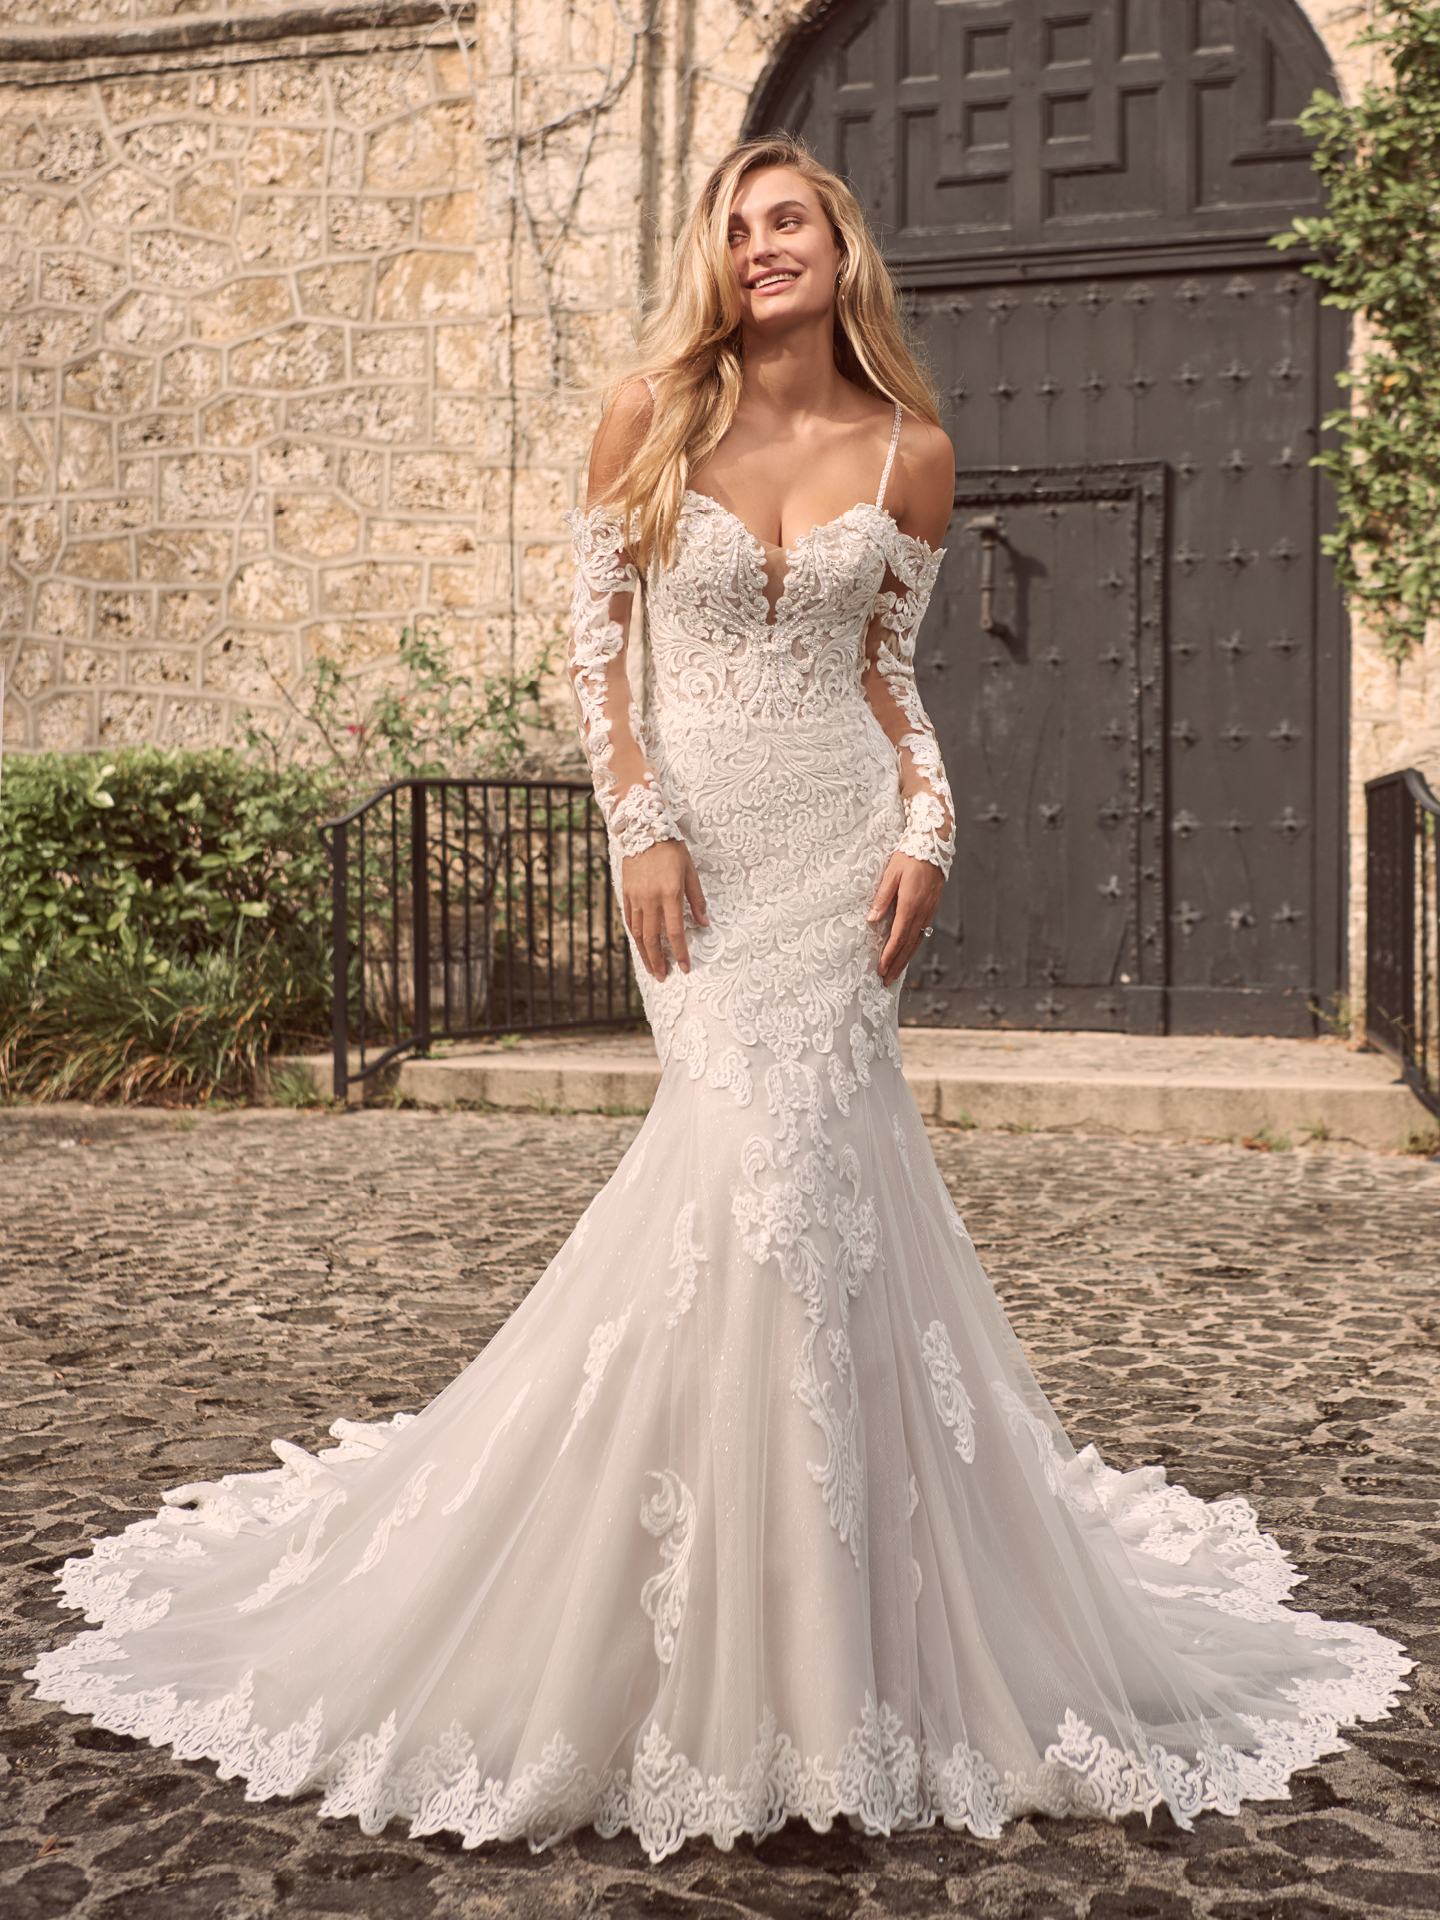 Wedding Dresses & Bridal Gowns | Maggie Sottero